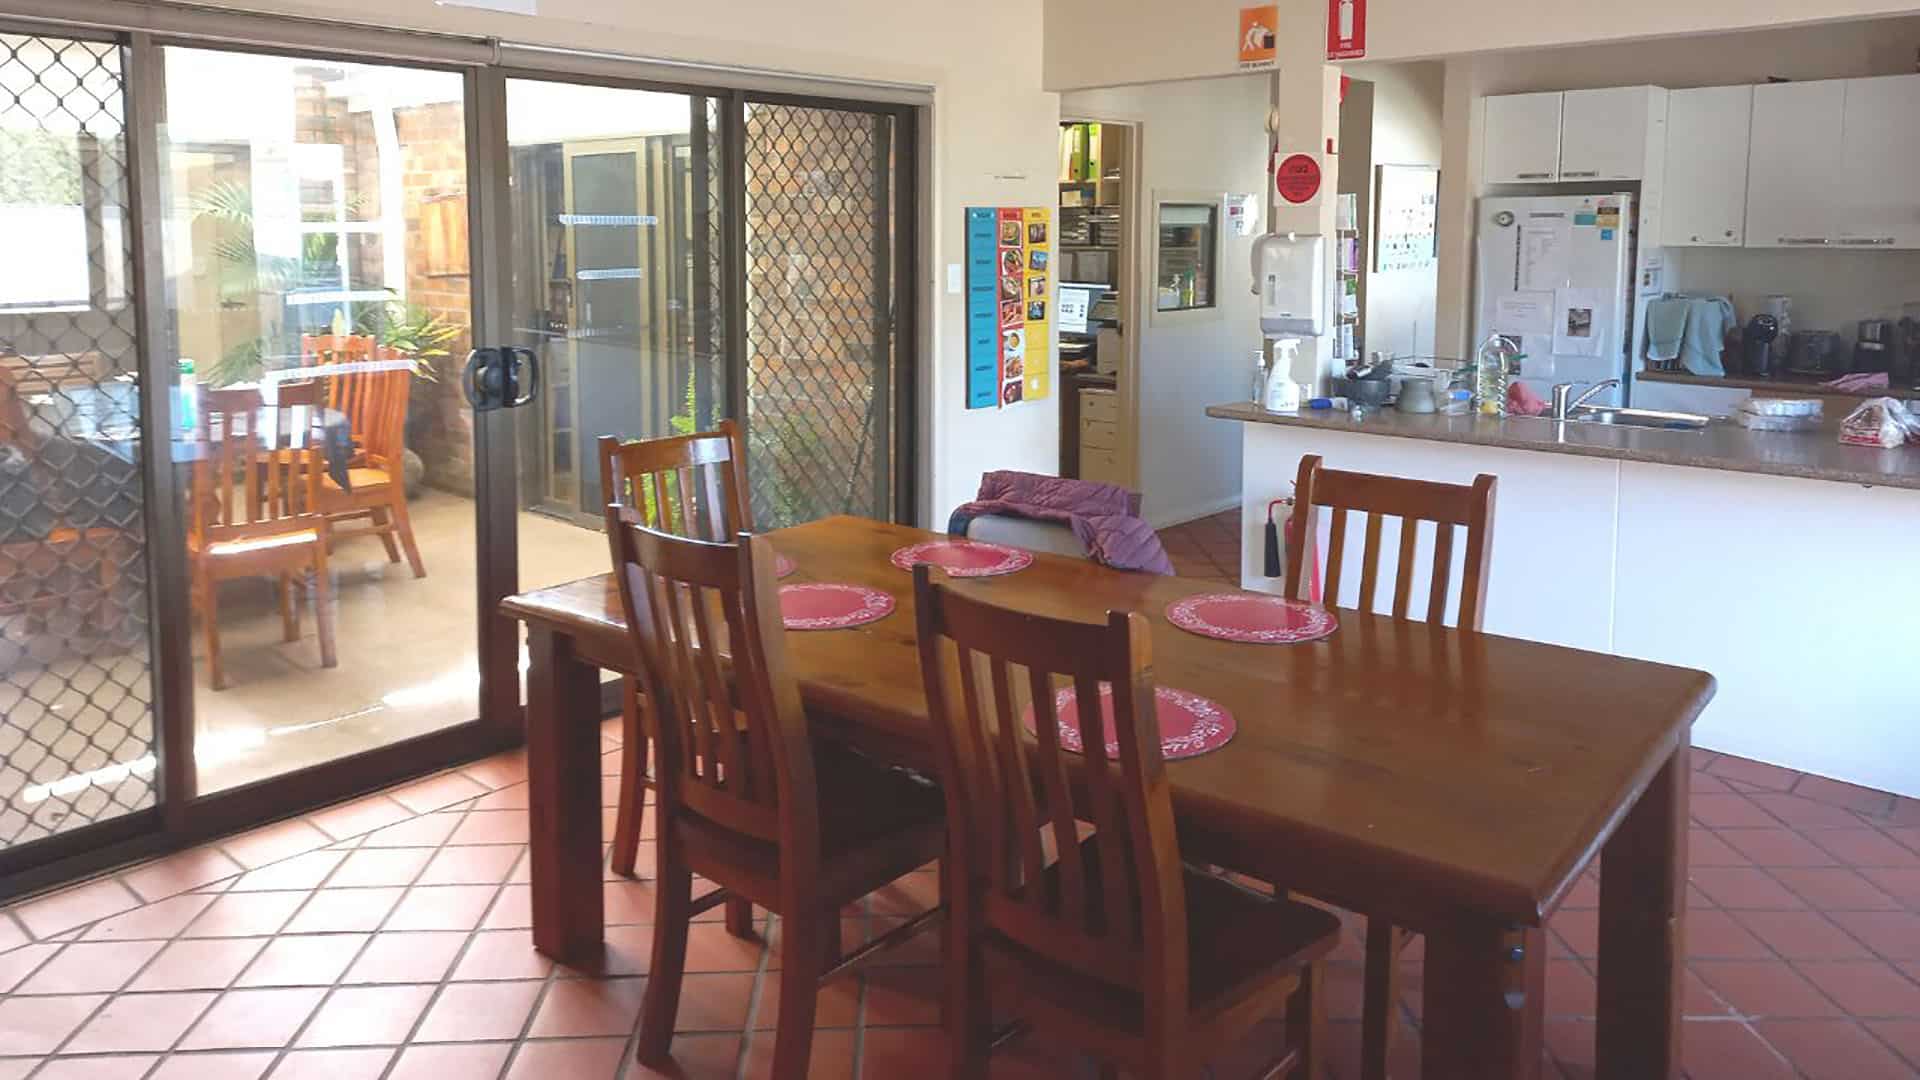 The kitchen and dining area.